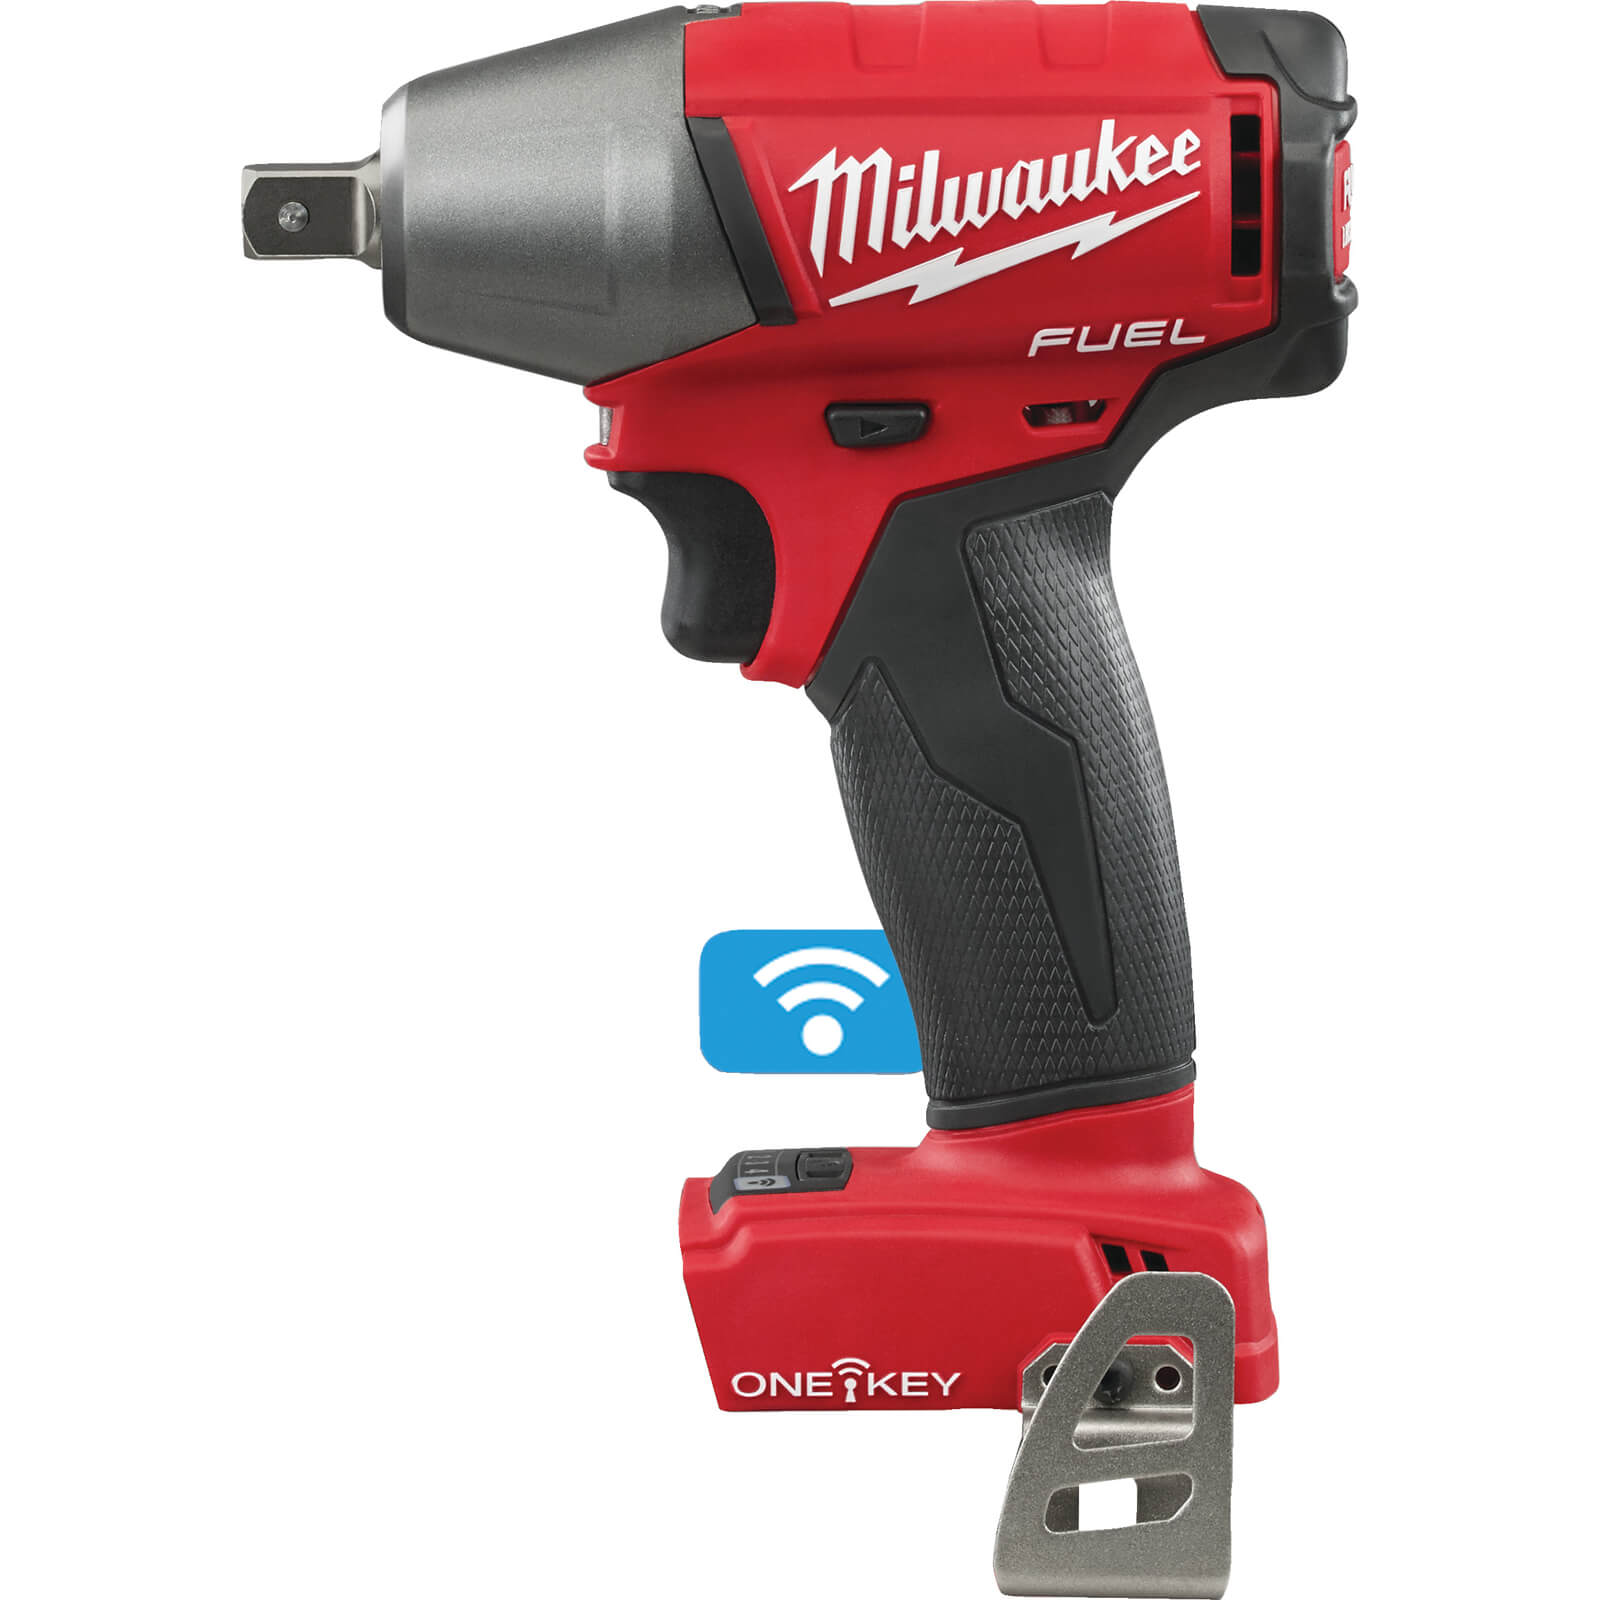 Image of Milwaukee M18 ONEIWP12 Fuel 18v Cordless Brushless 1/2" Drive Impact Wrench No Batteries No Charger No Case